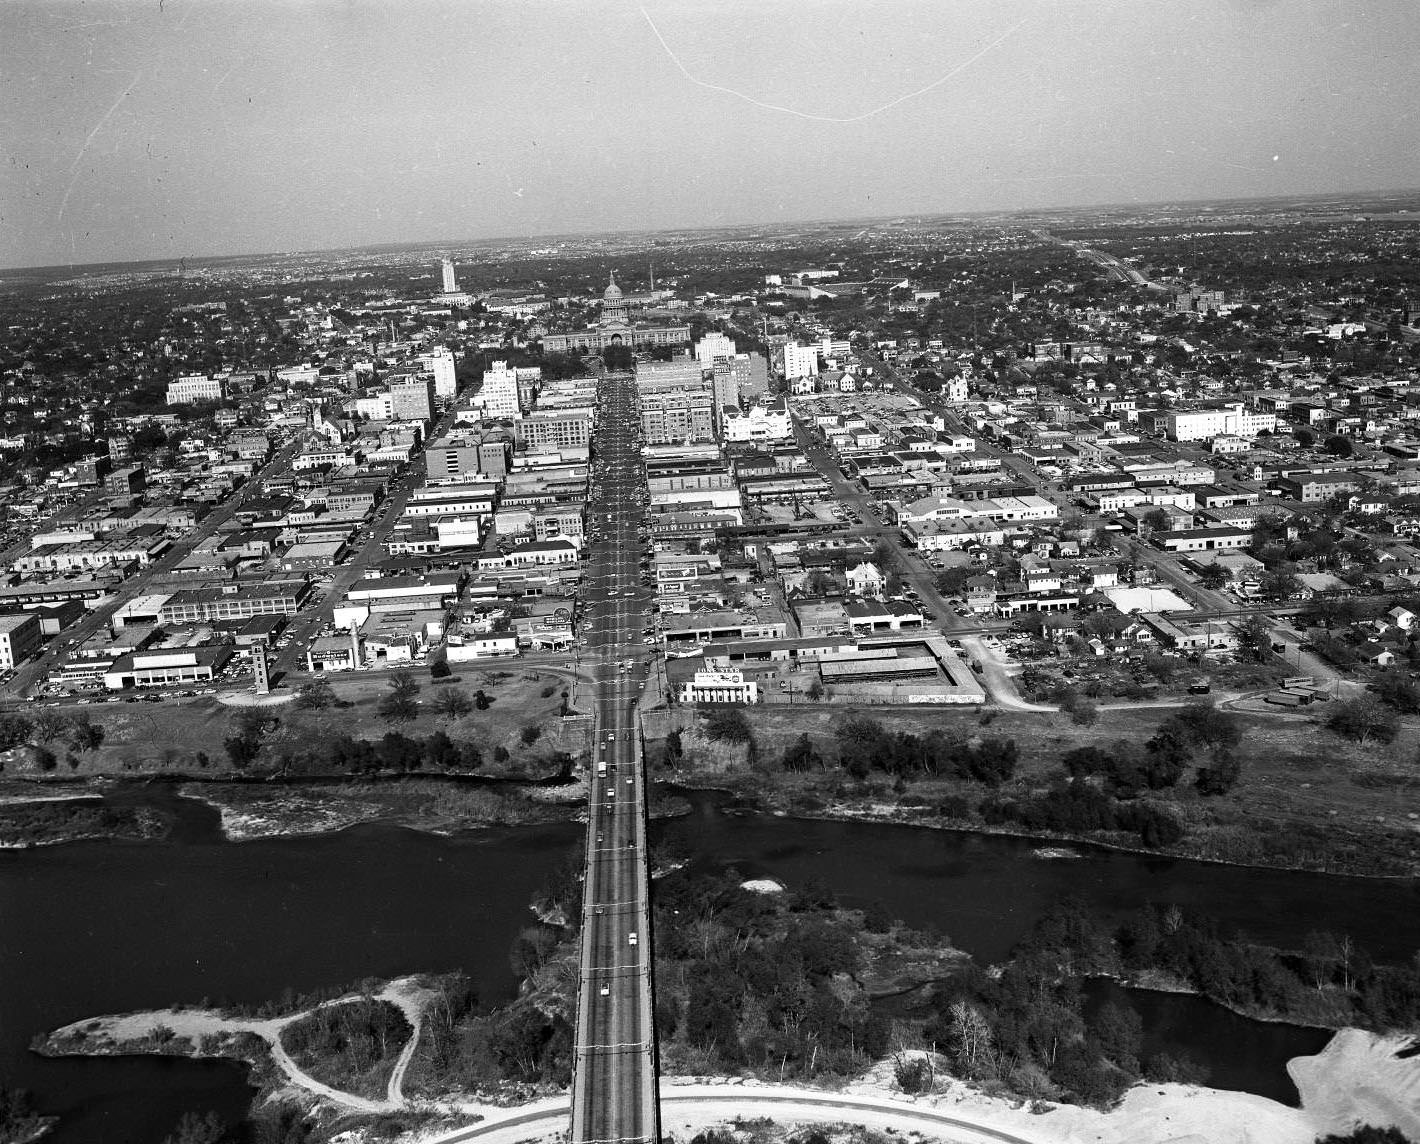 Aerial shot above the Congress Ave. Bridge and Colorado River looking directly north to Capitol, UT Tower in distance, 1959